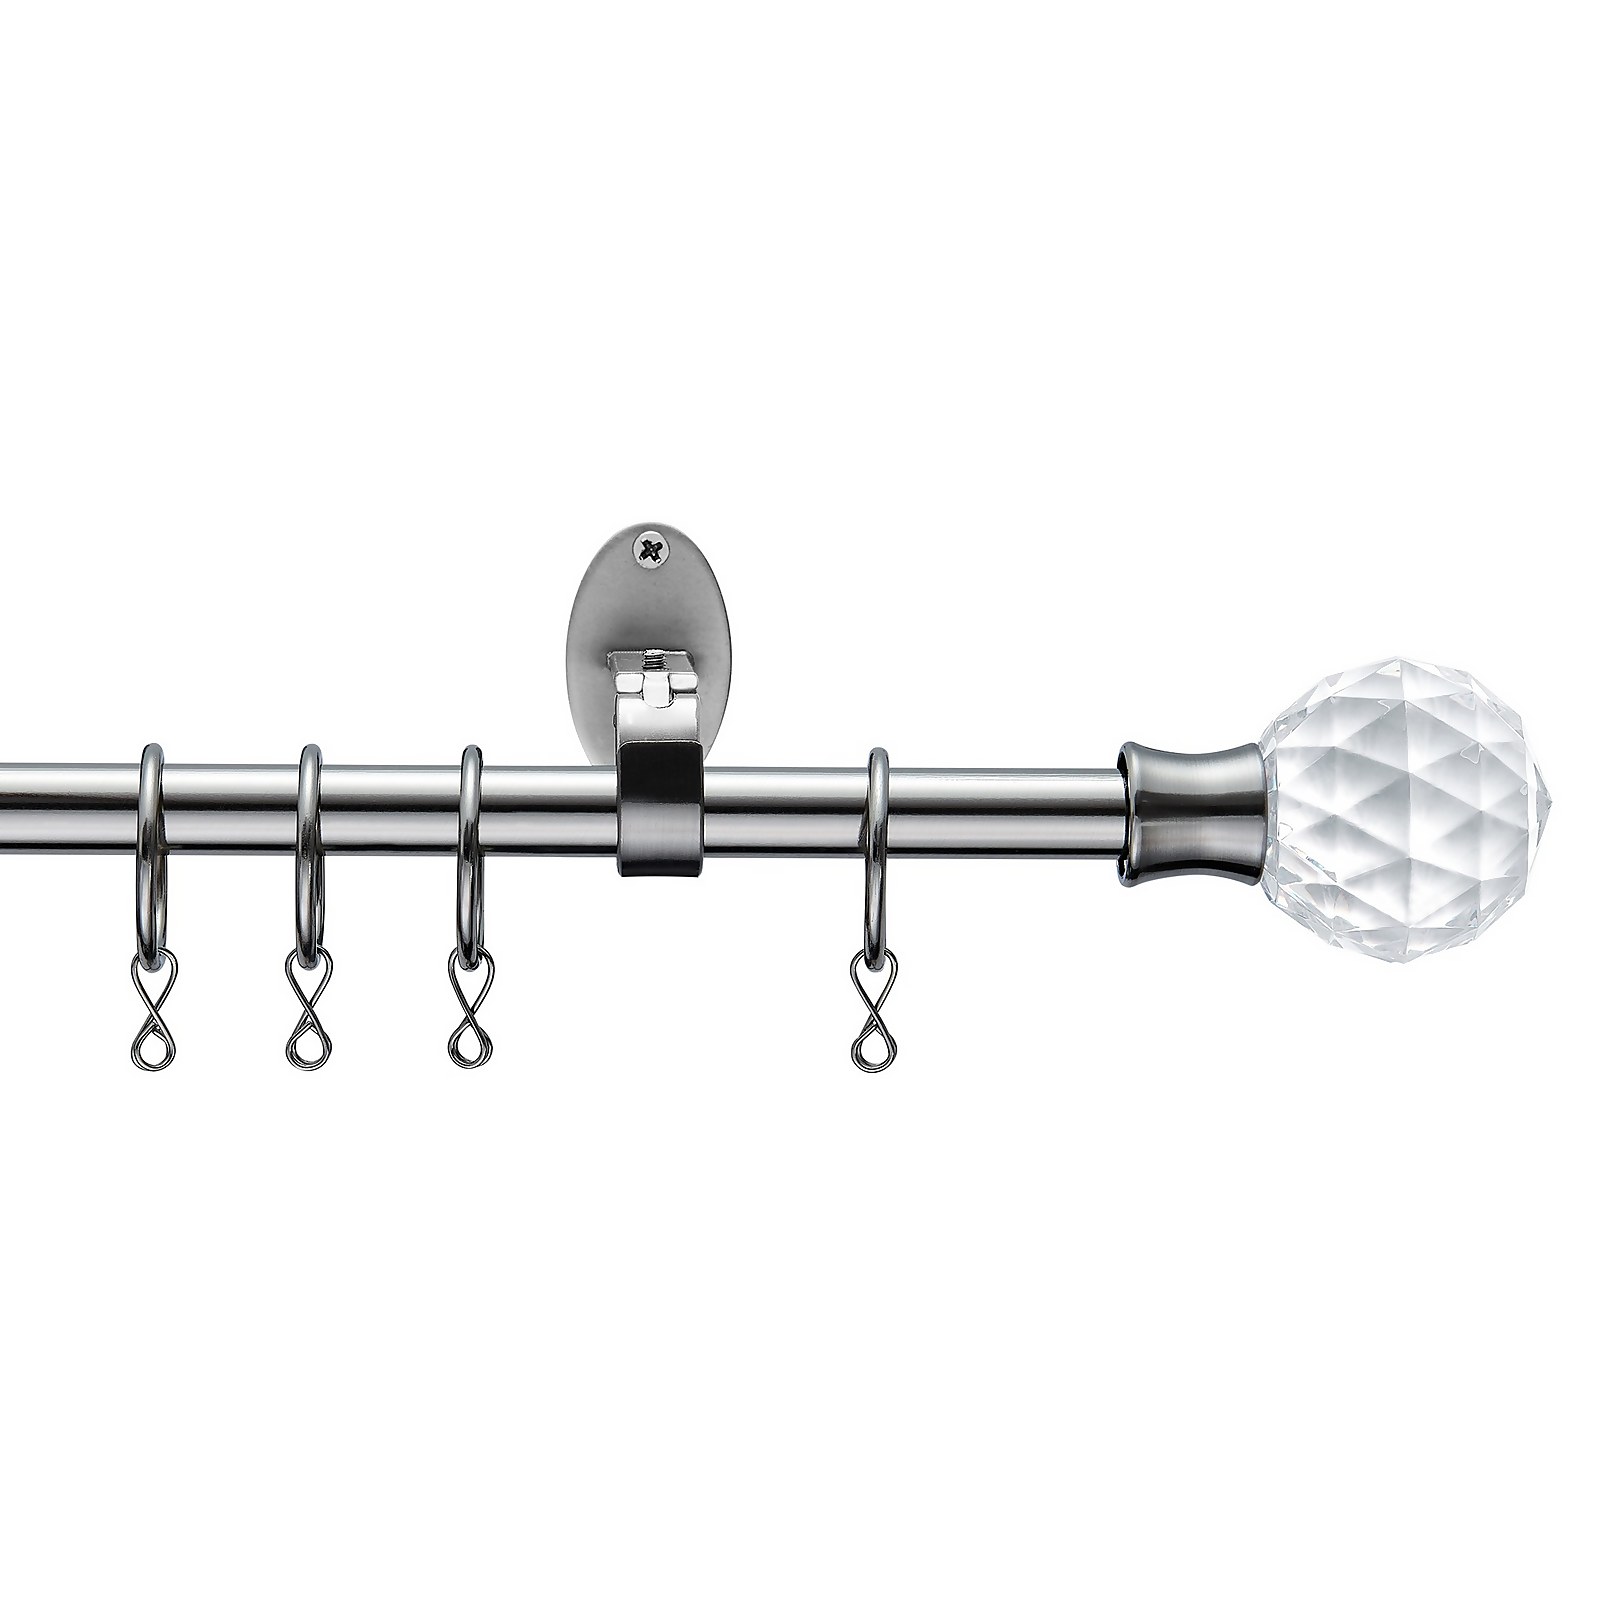 Photo of Extendable Curtain Pole With Crackle Glass Finial - Steel